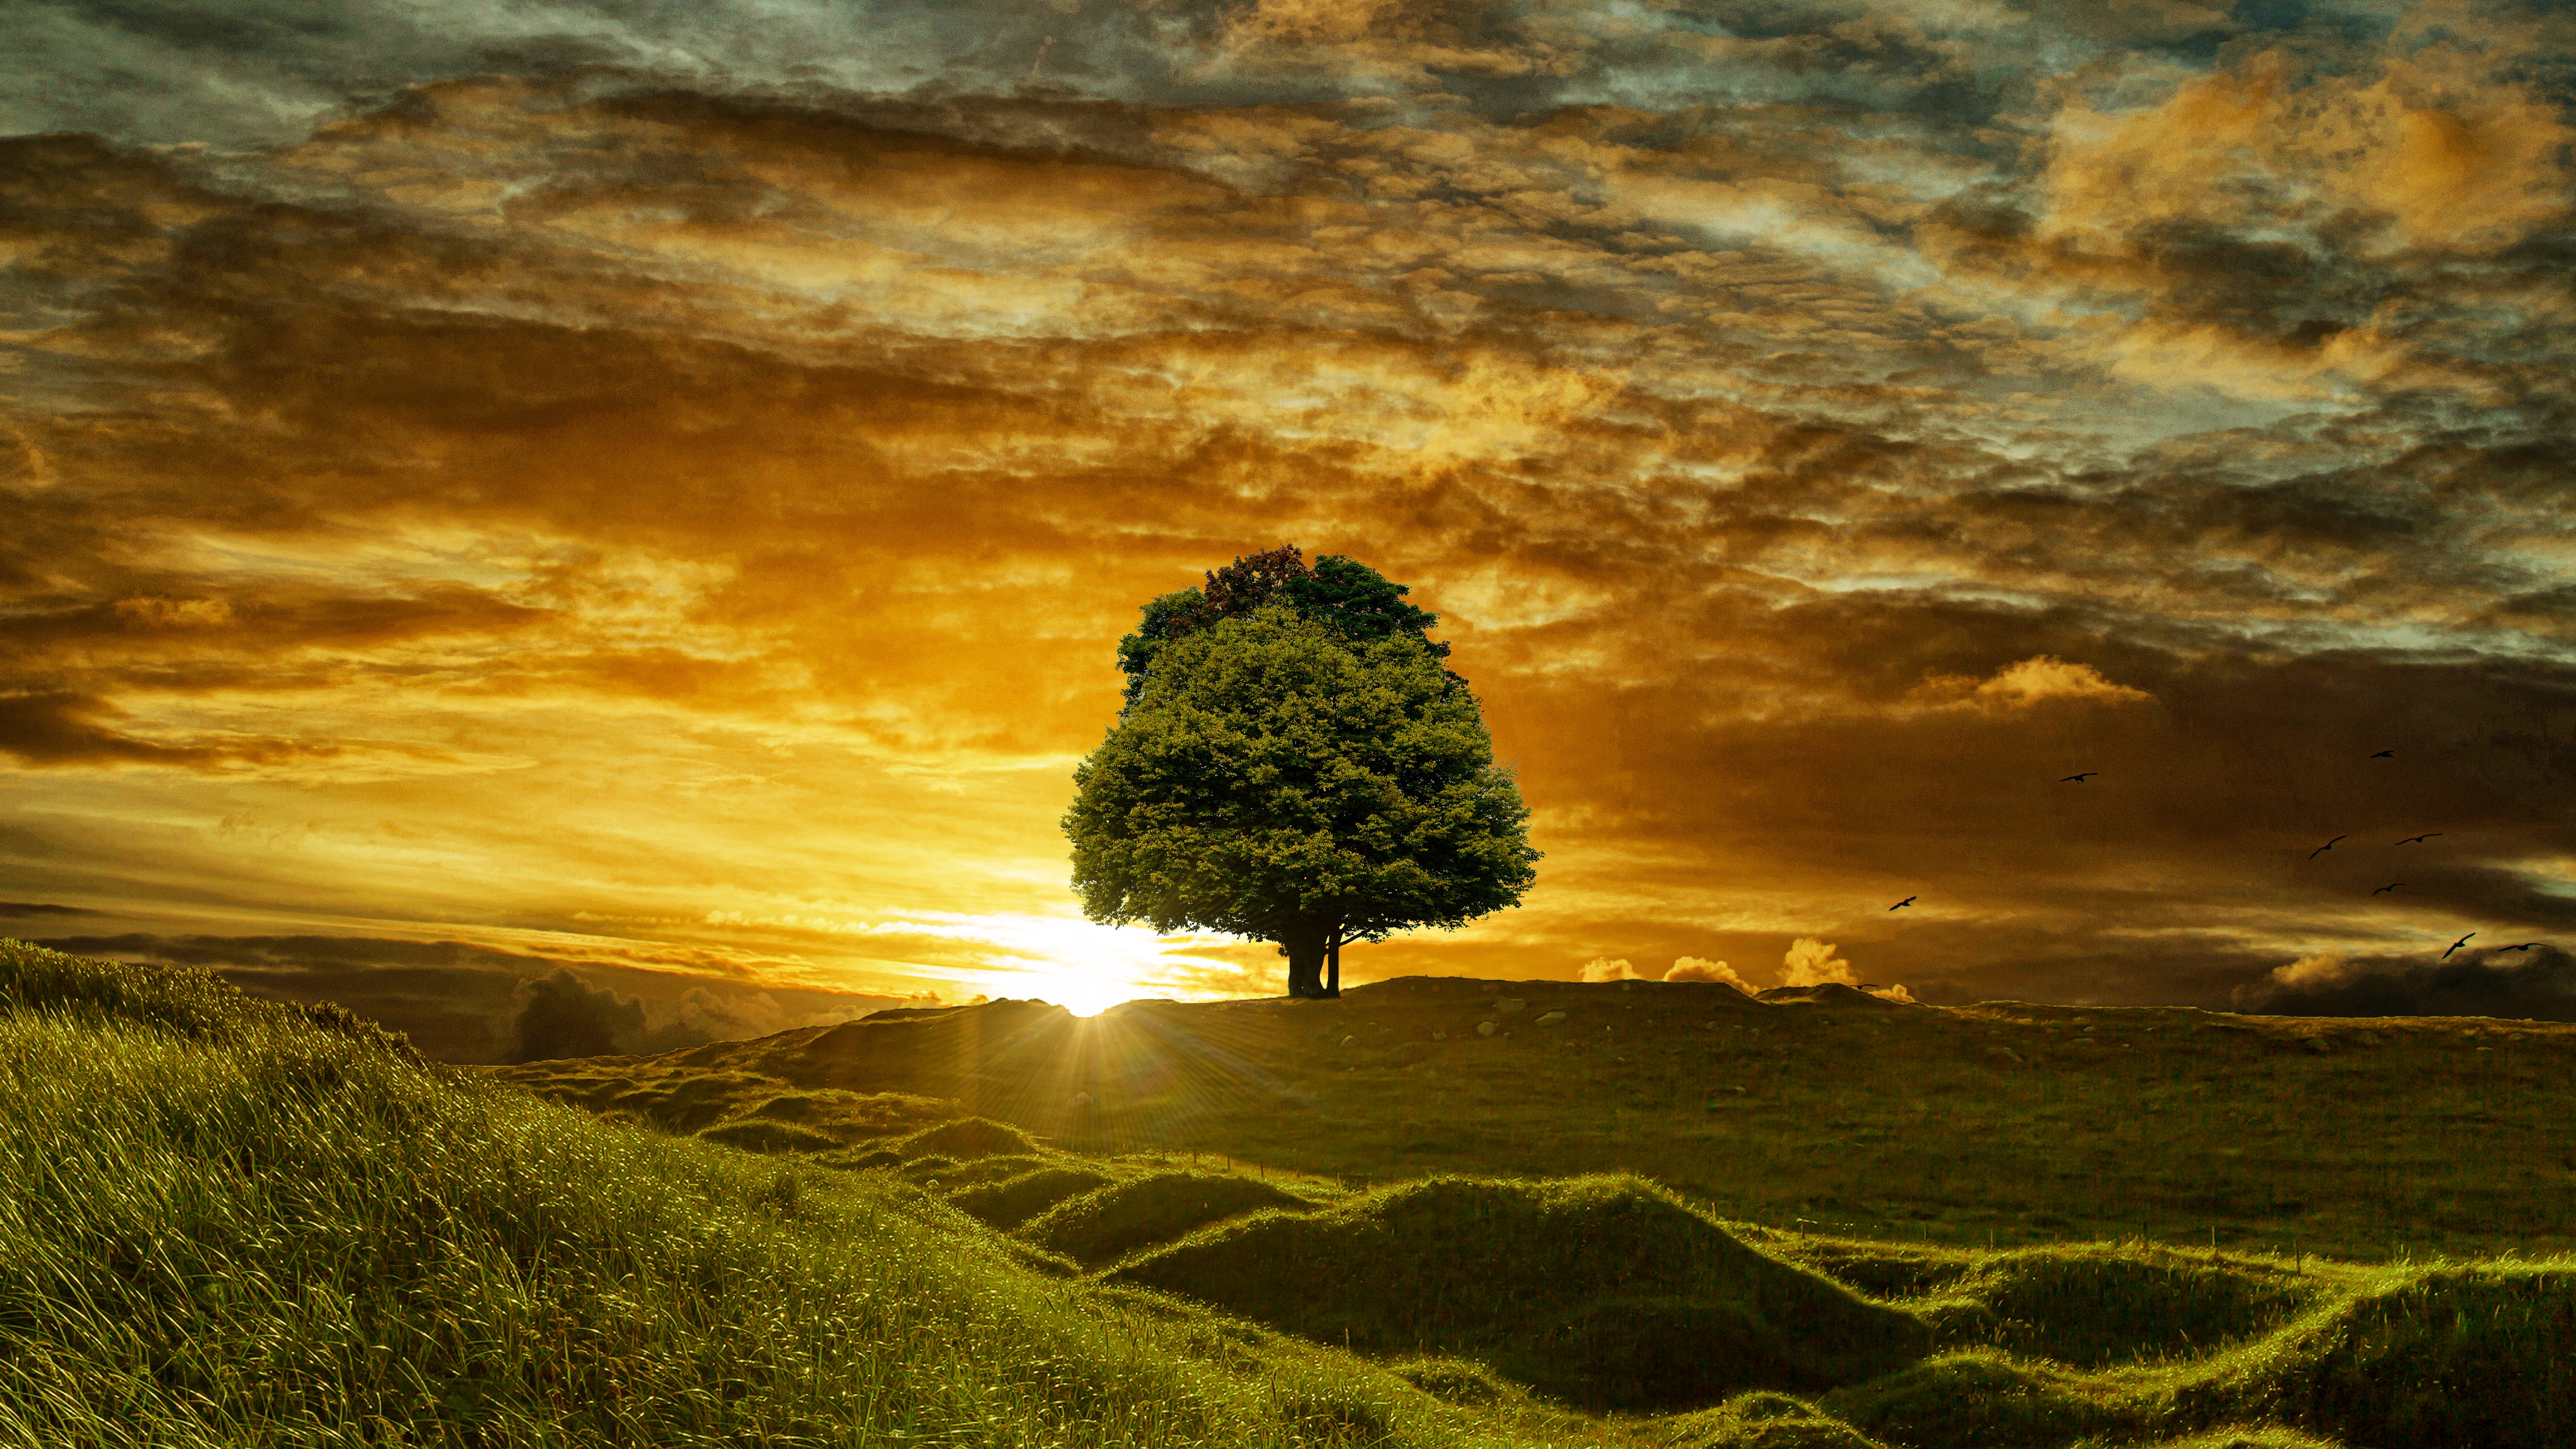 Wallpapers fantastic picturesque alone tree on the desktop